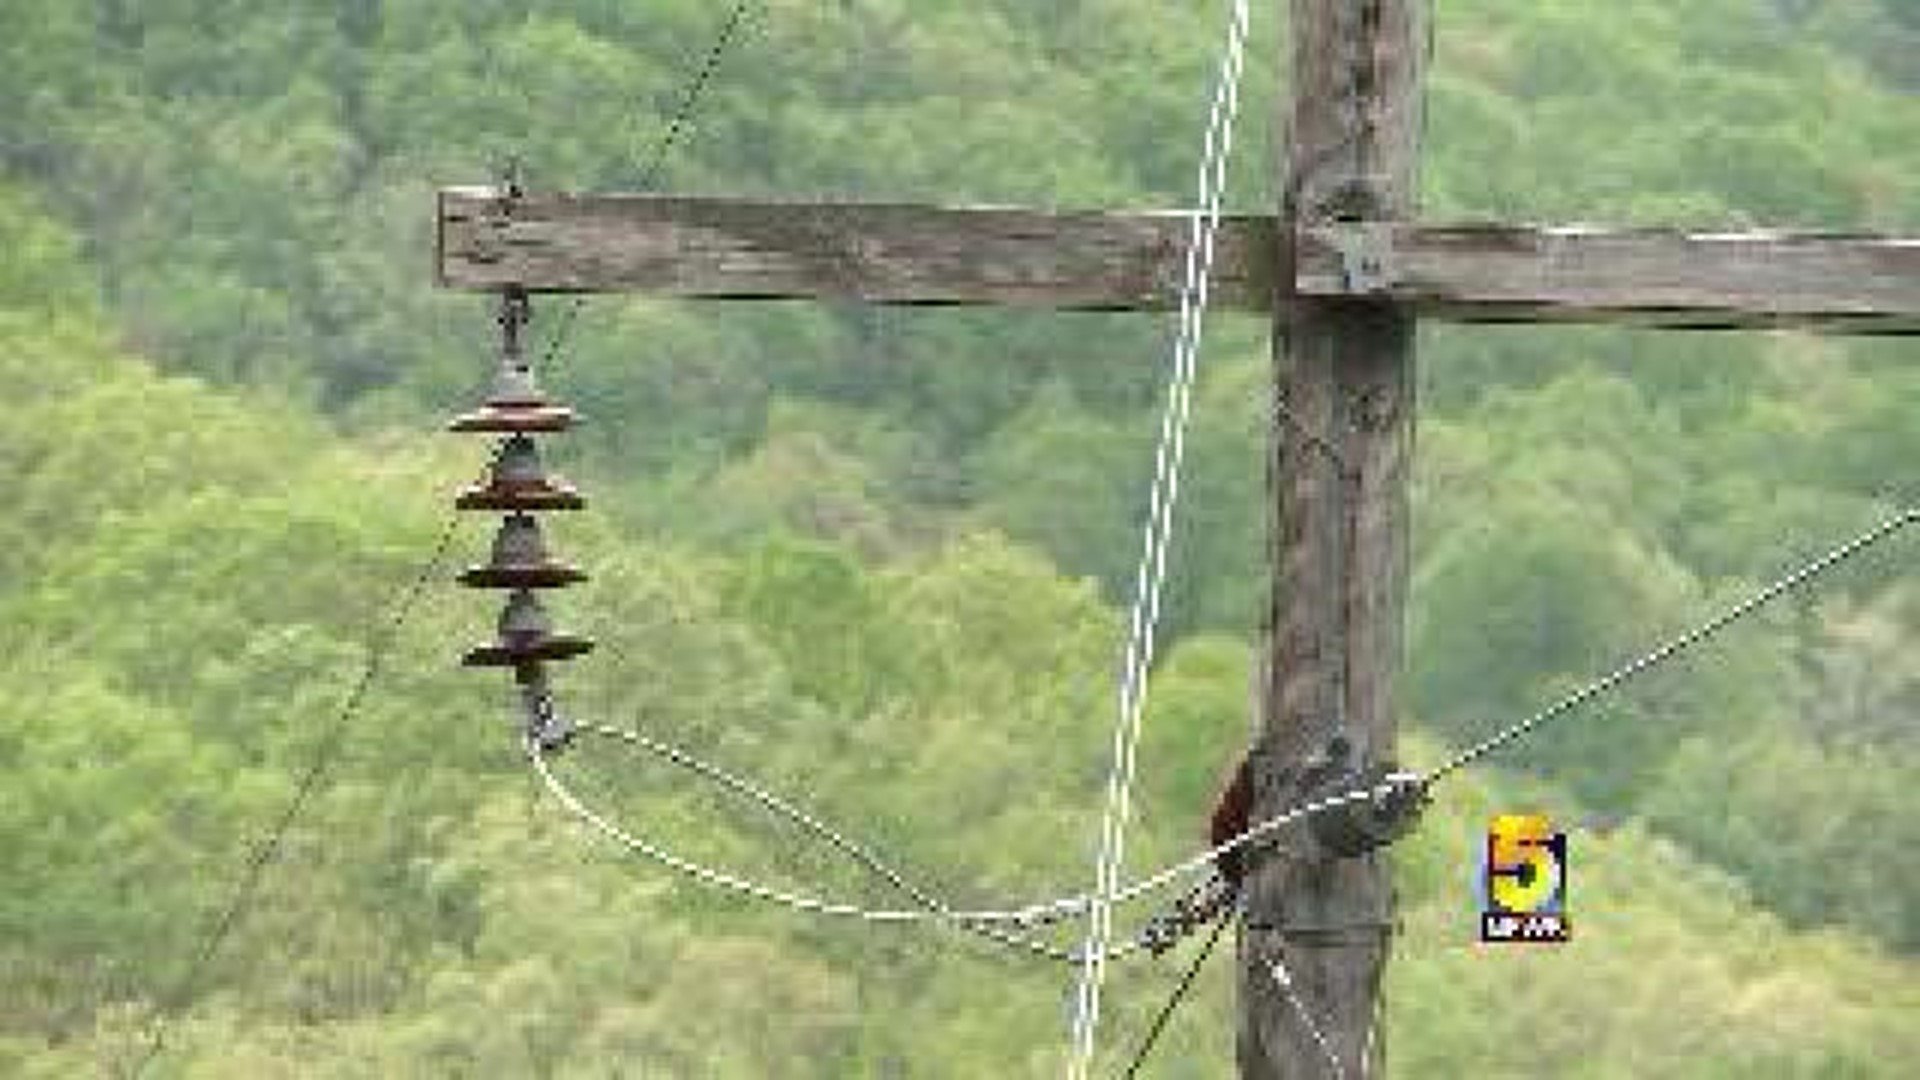 Public Hearings Held Over SWEPCO Transmission Lines